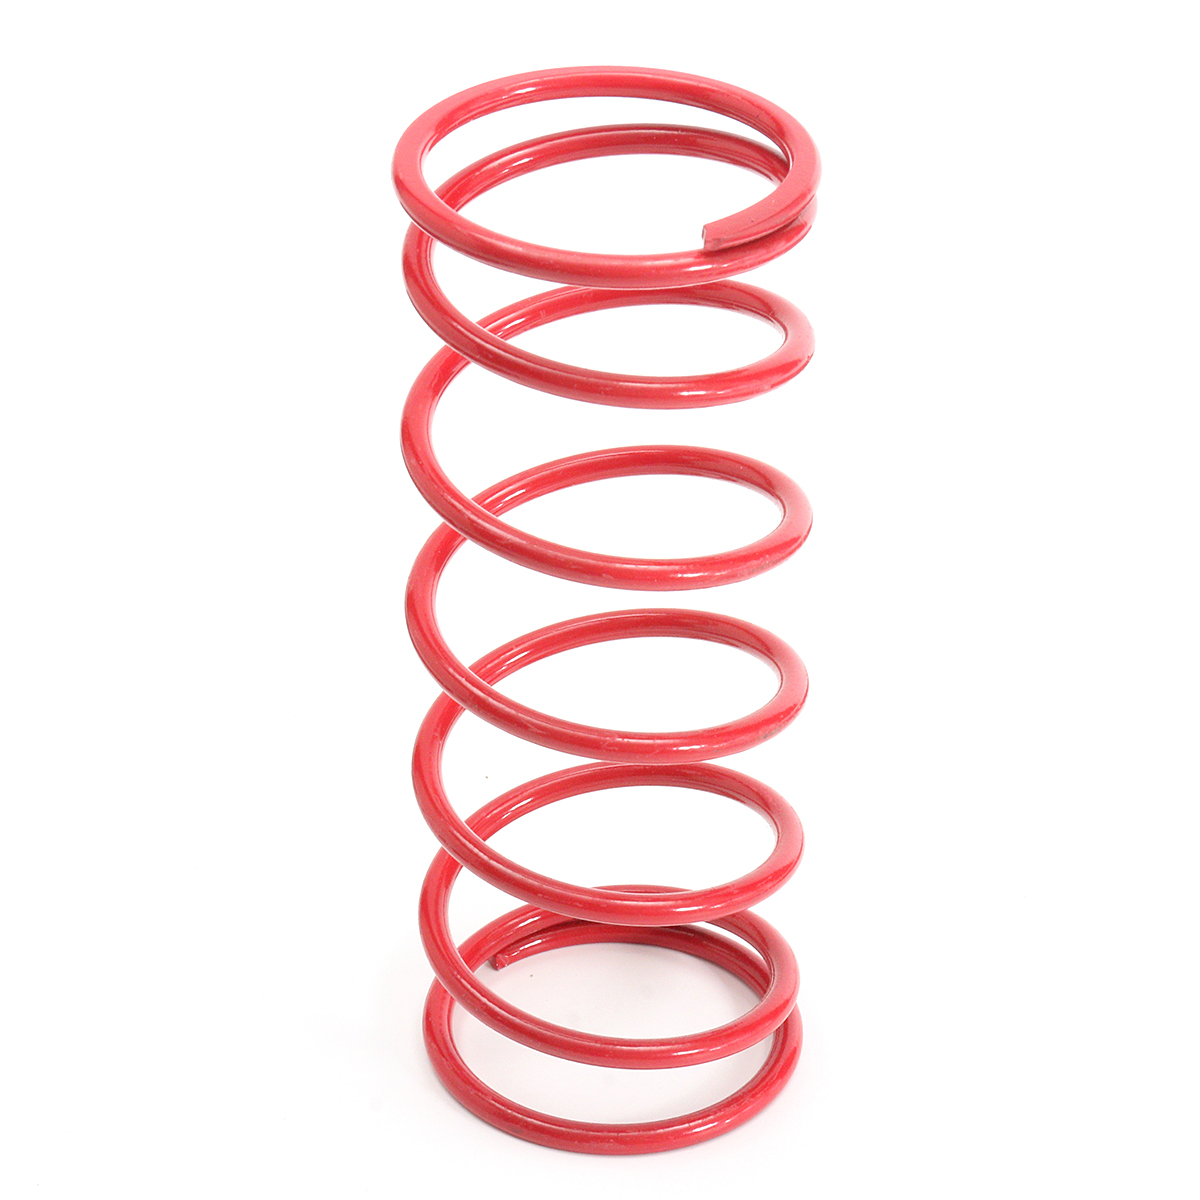 2000 RPM Performance Tourque Clutch Springs for GY6 150Cc 125Cc Chinese Scooter